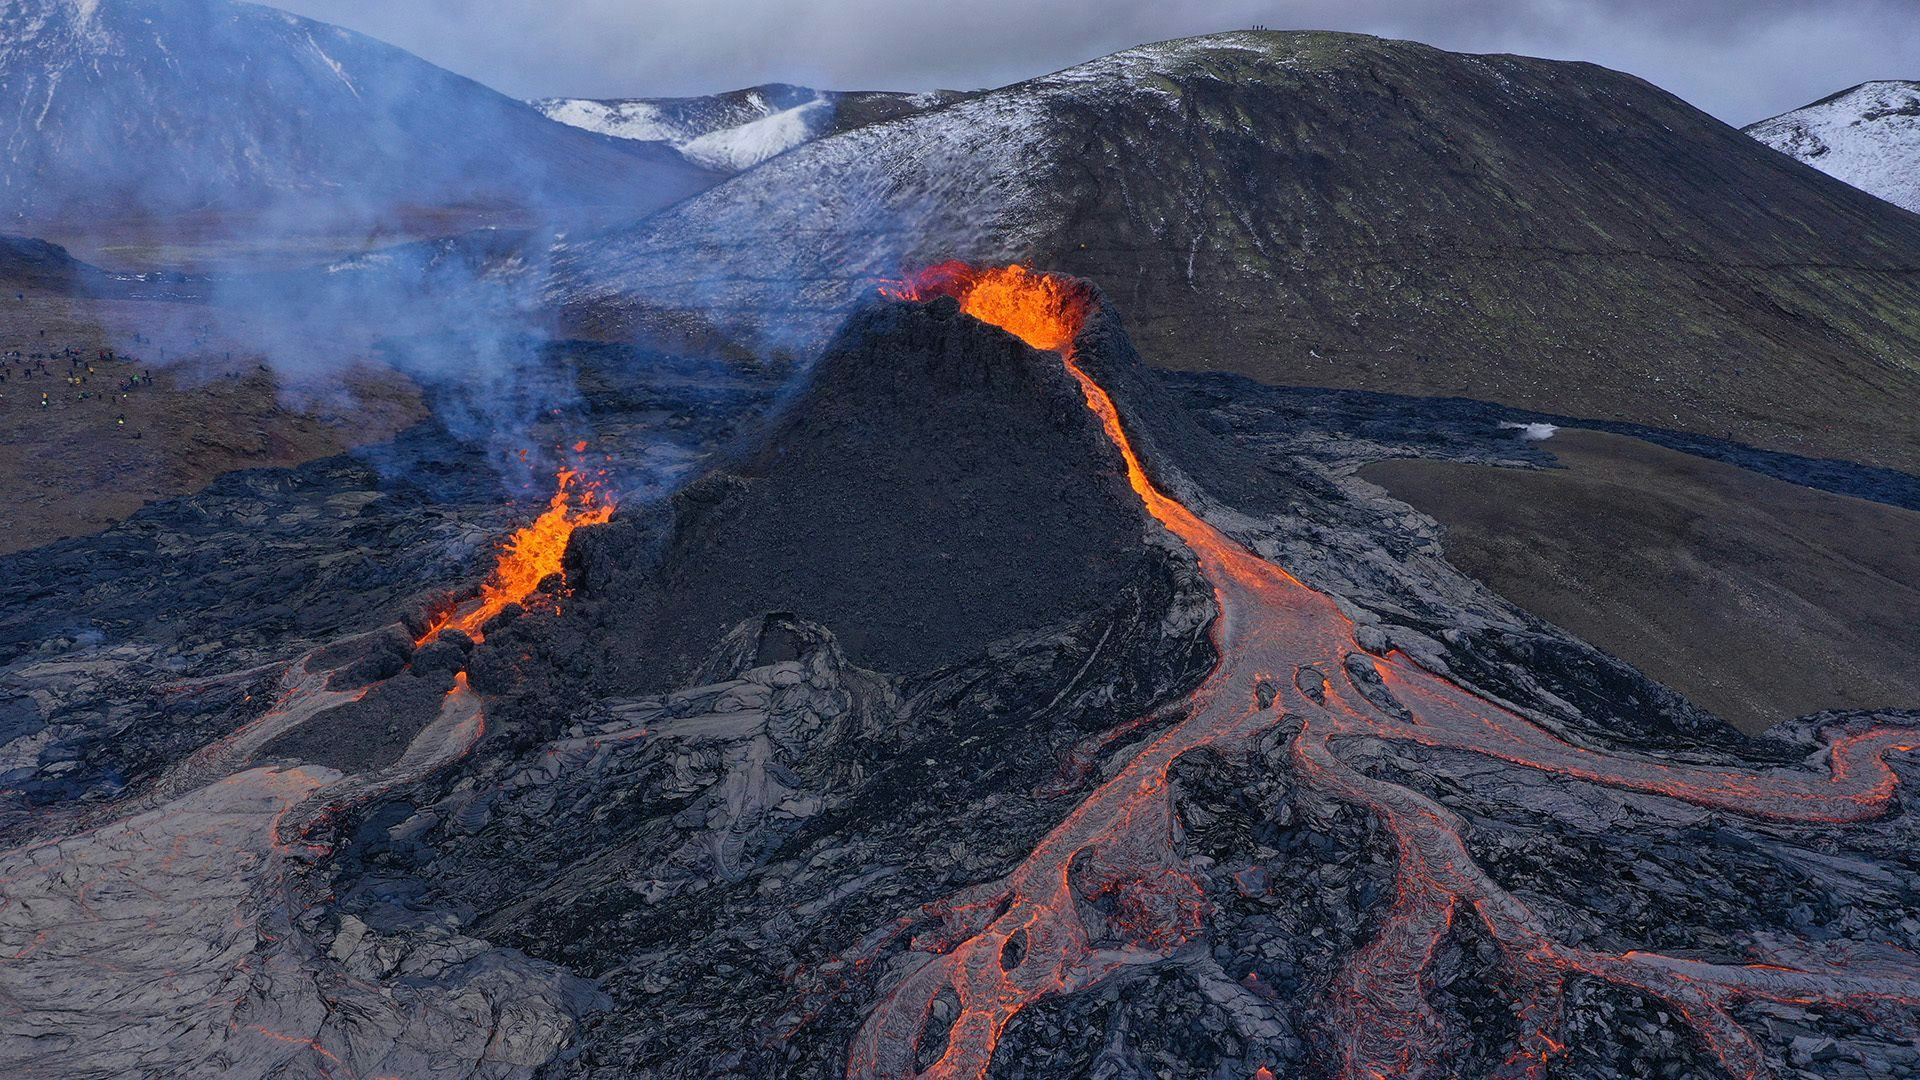 An active volcano eruption with lava flowing down the terrain, emitting smoke